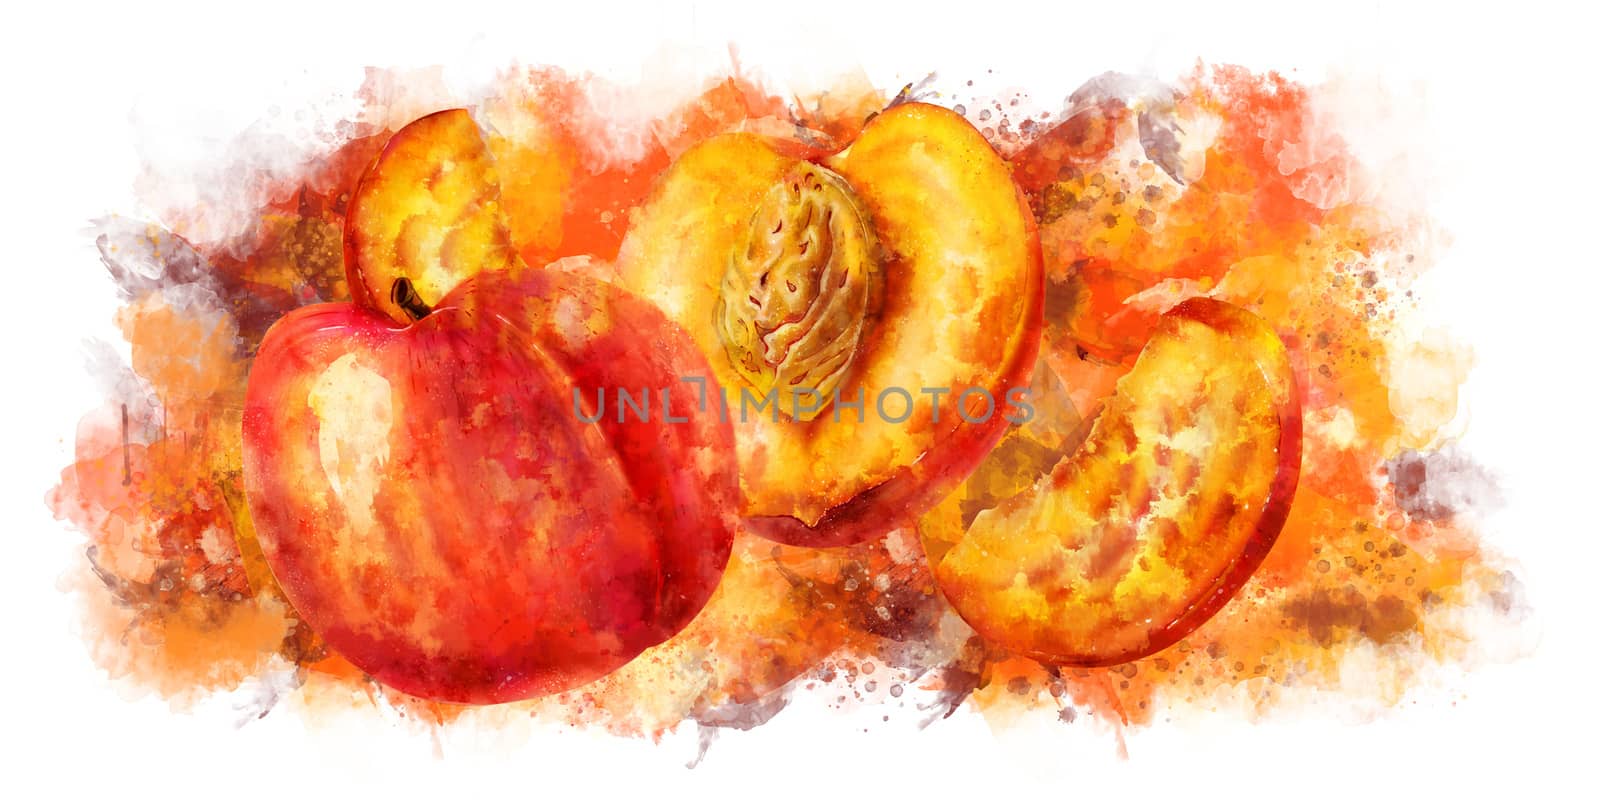 Peach, isolated hand-painted illustration on white background